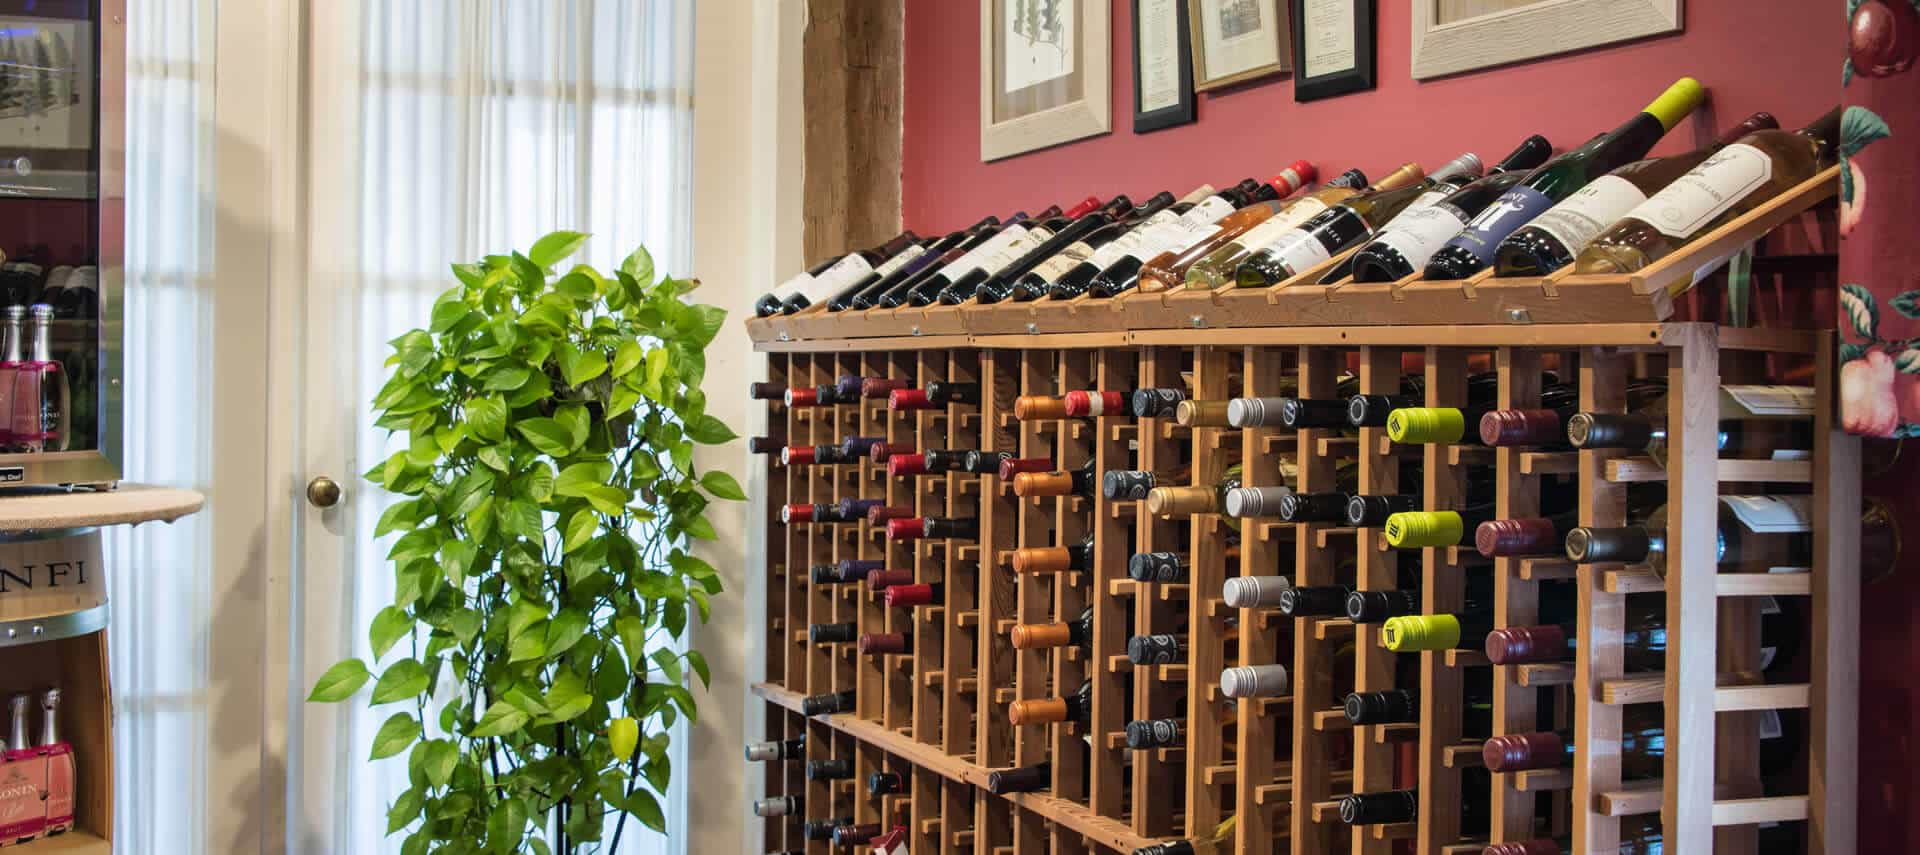 A wooden wine rack full of many bottles of wine next to a set of white french doors.